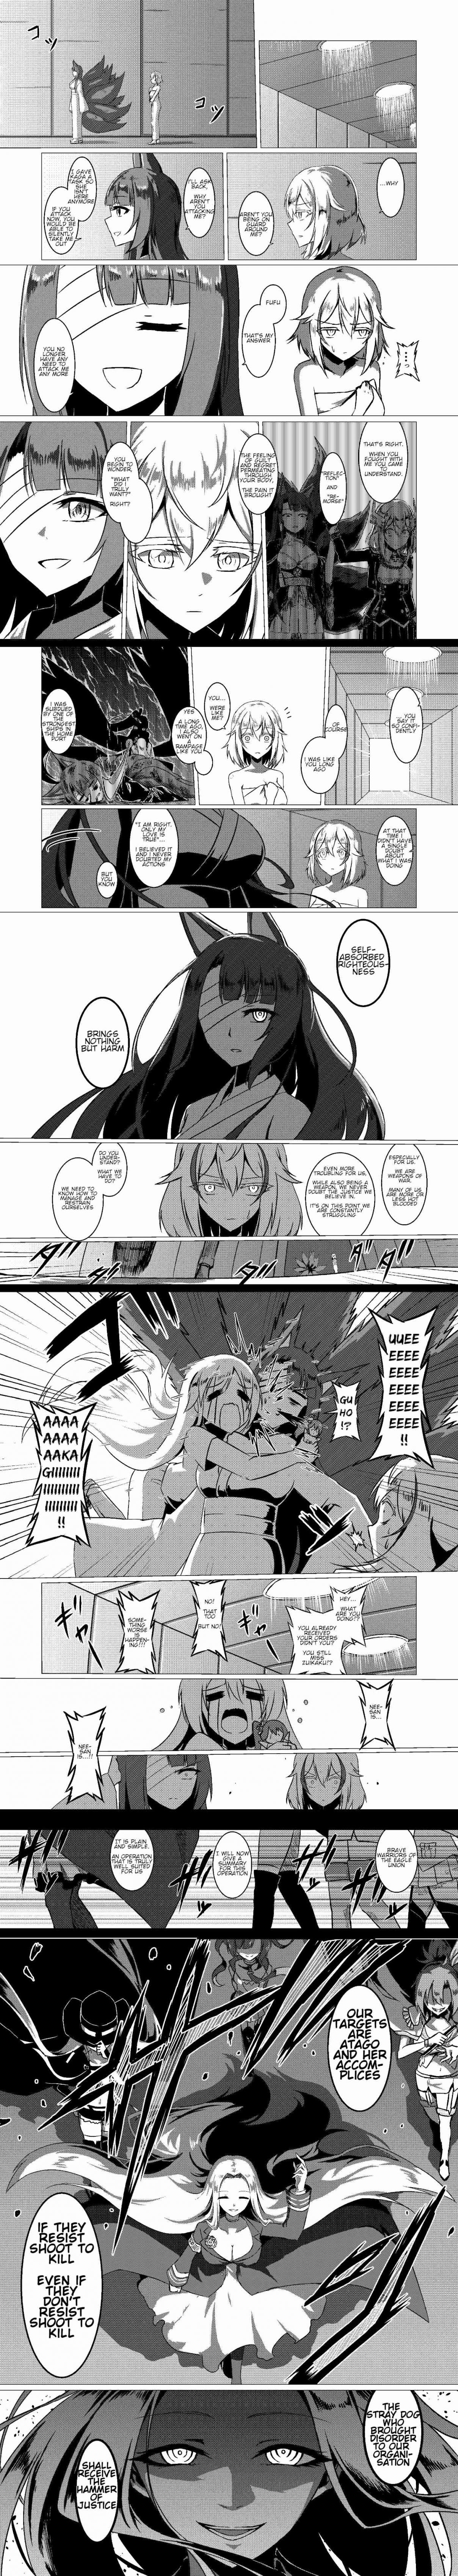 Azur Lane: A Journal Ch. 19 Where Justice is Found